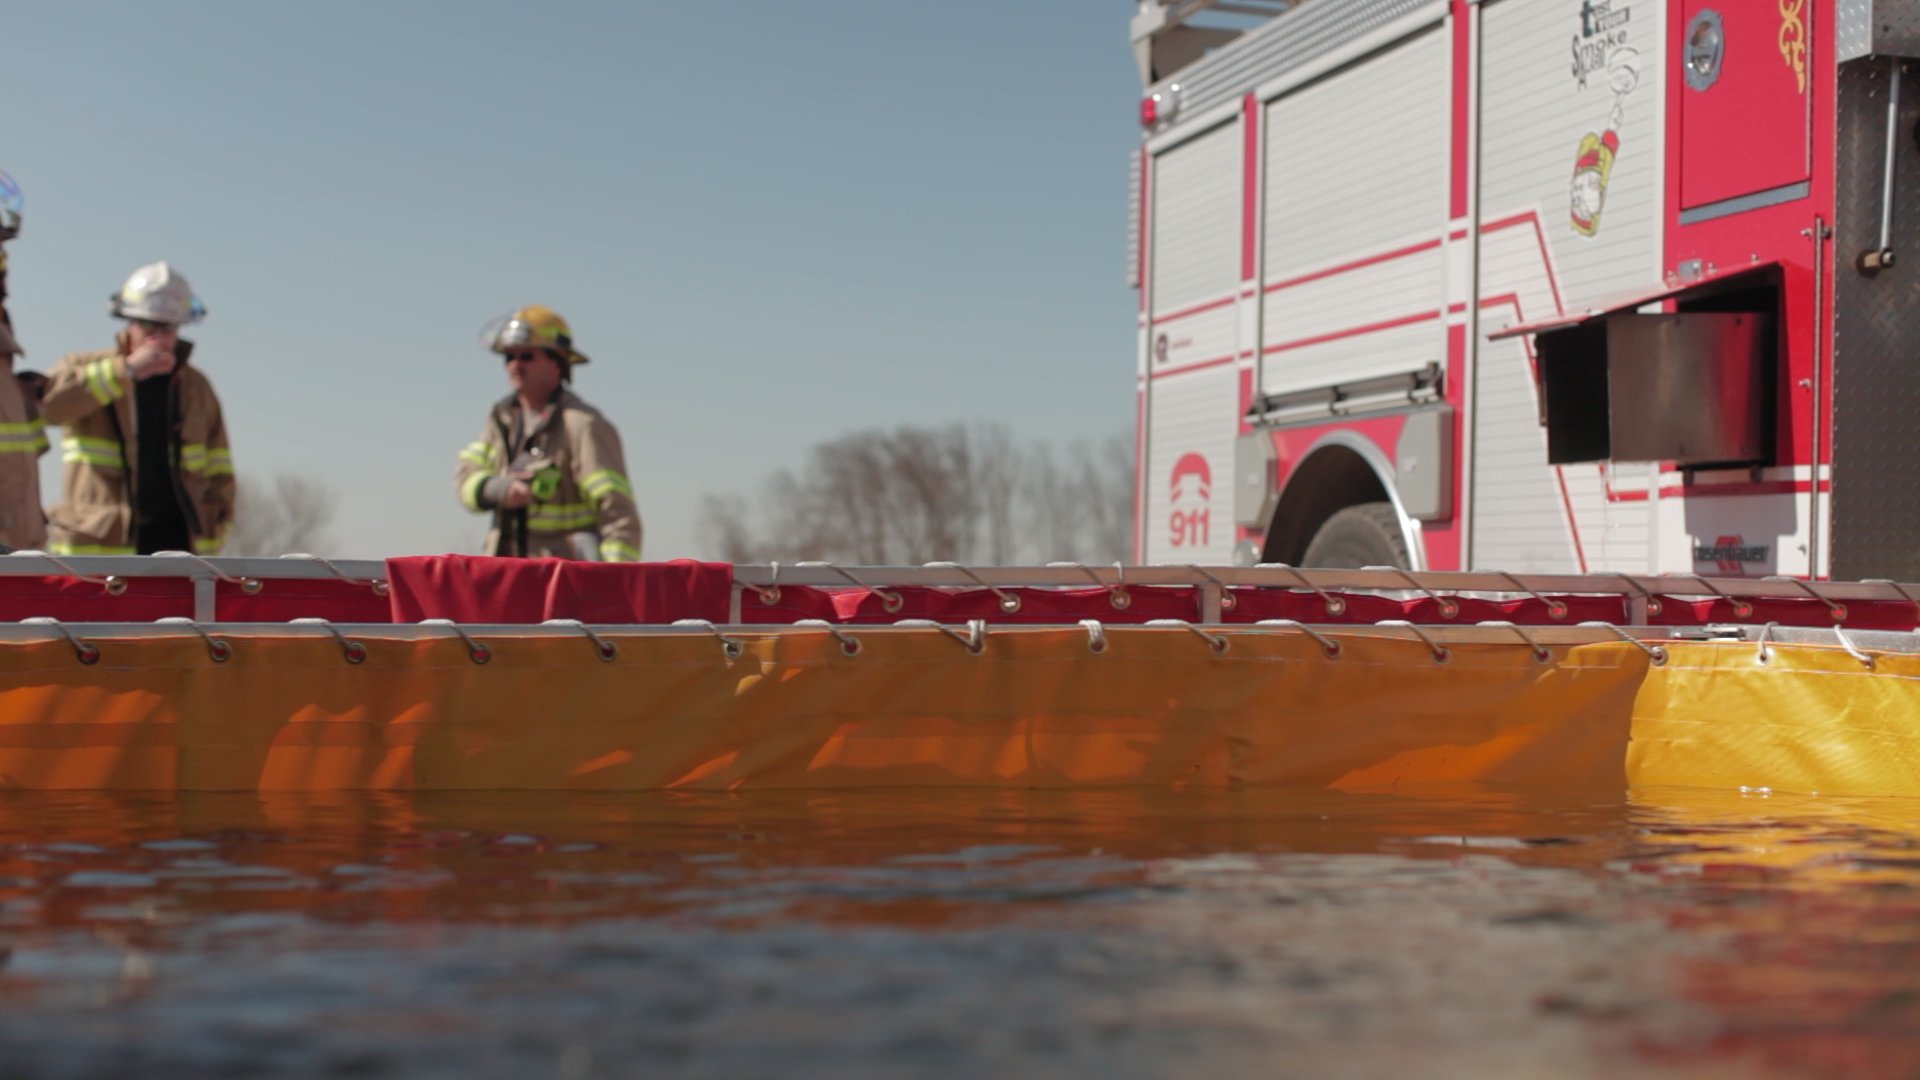 A portable tank is filled with water during a training exercise for tanker shuttle services.